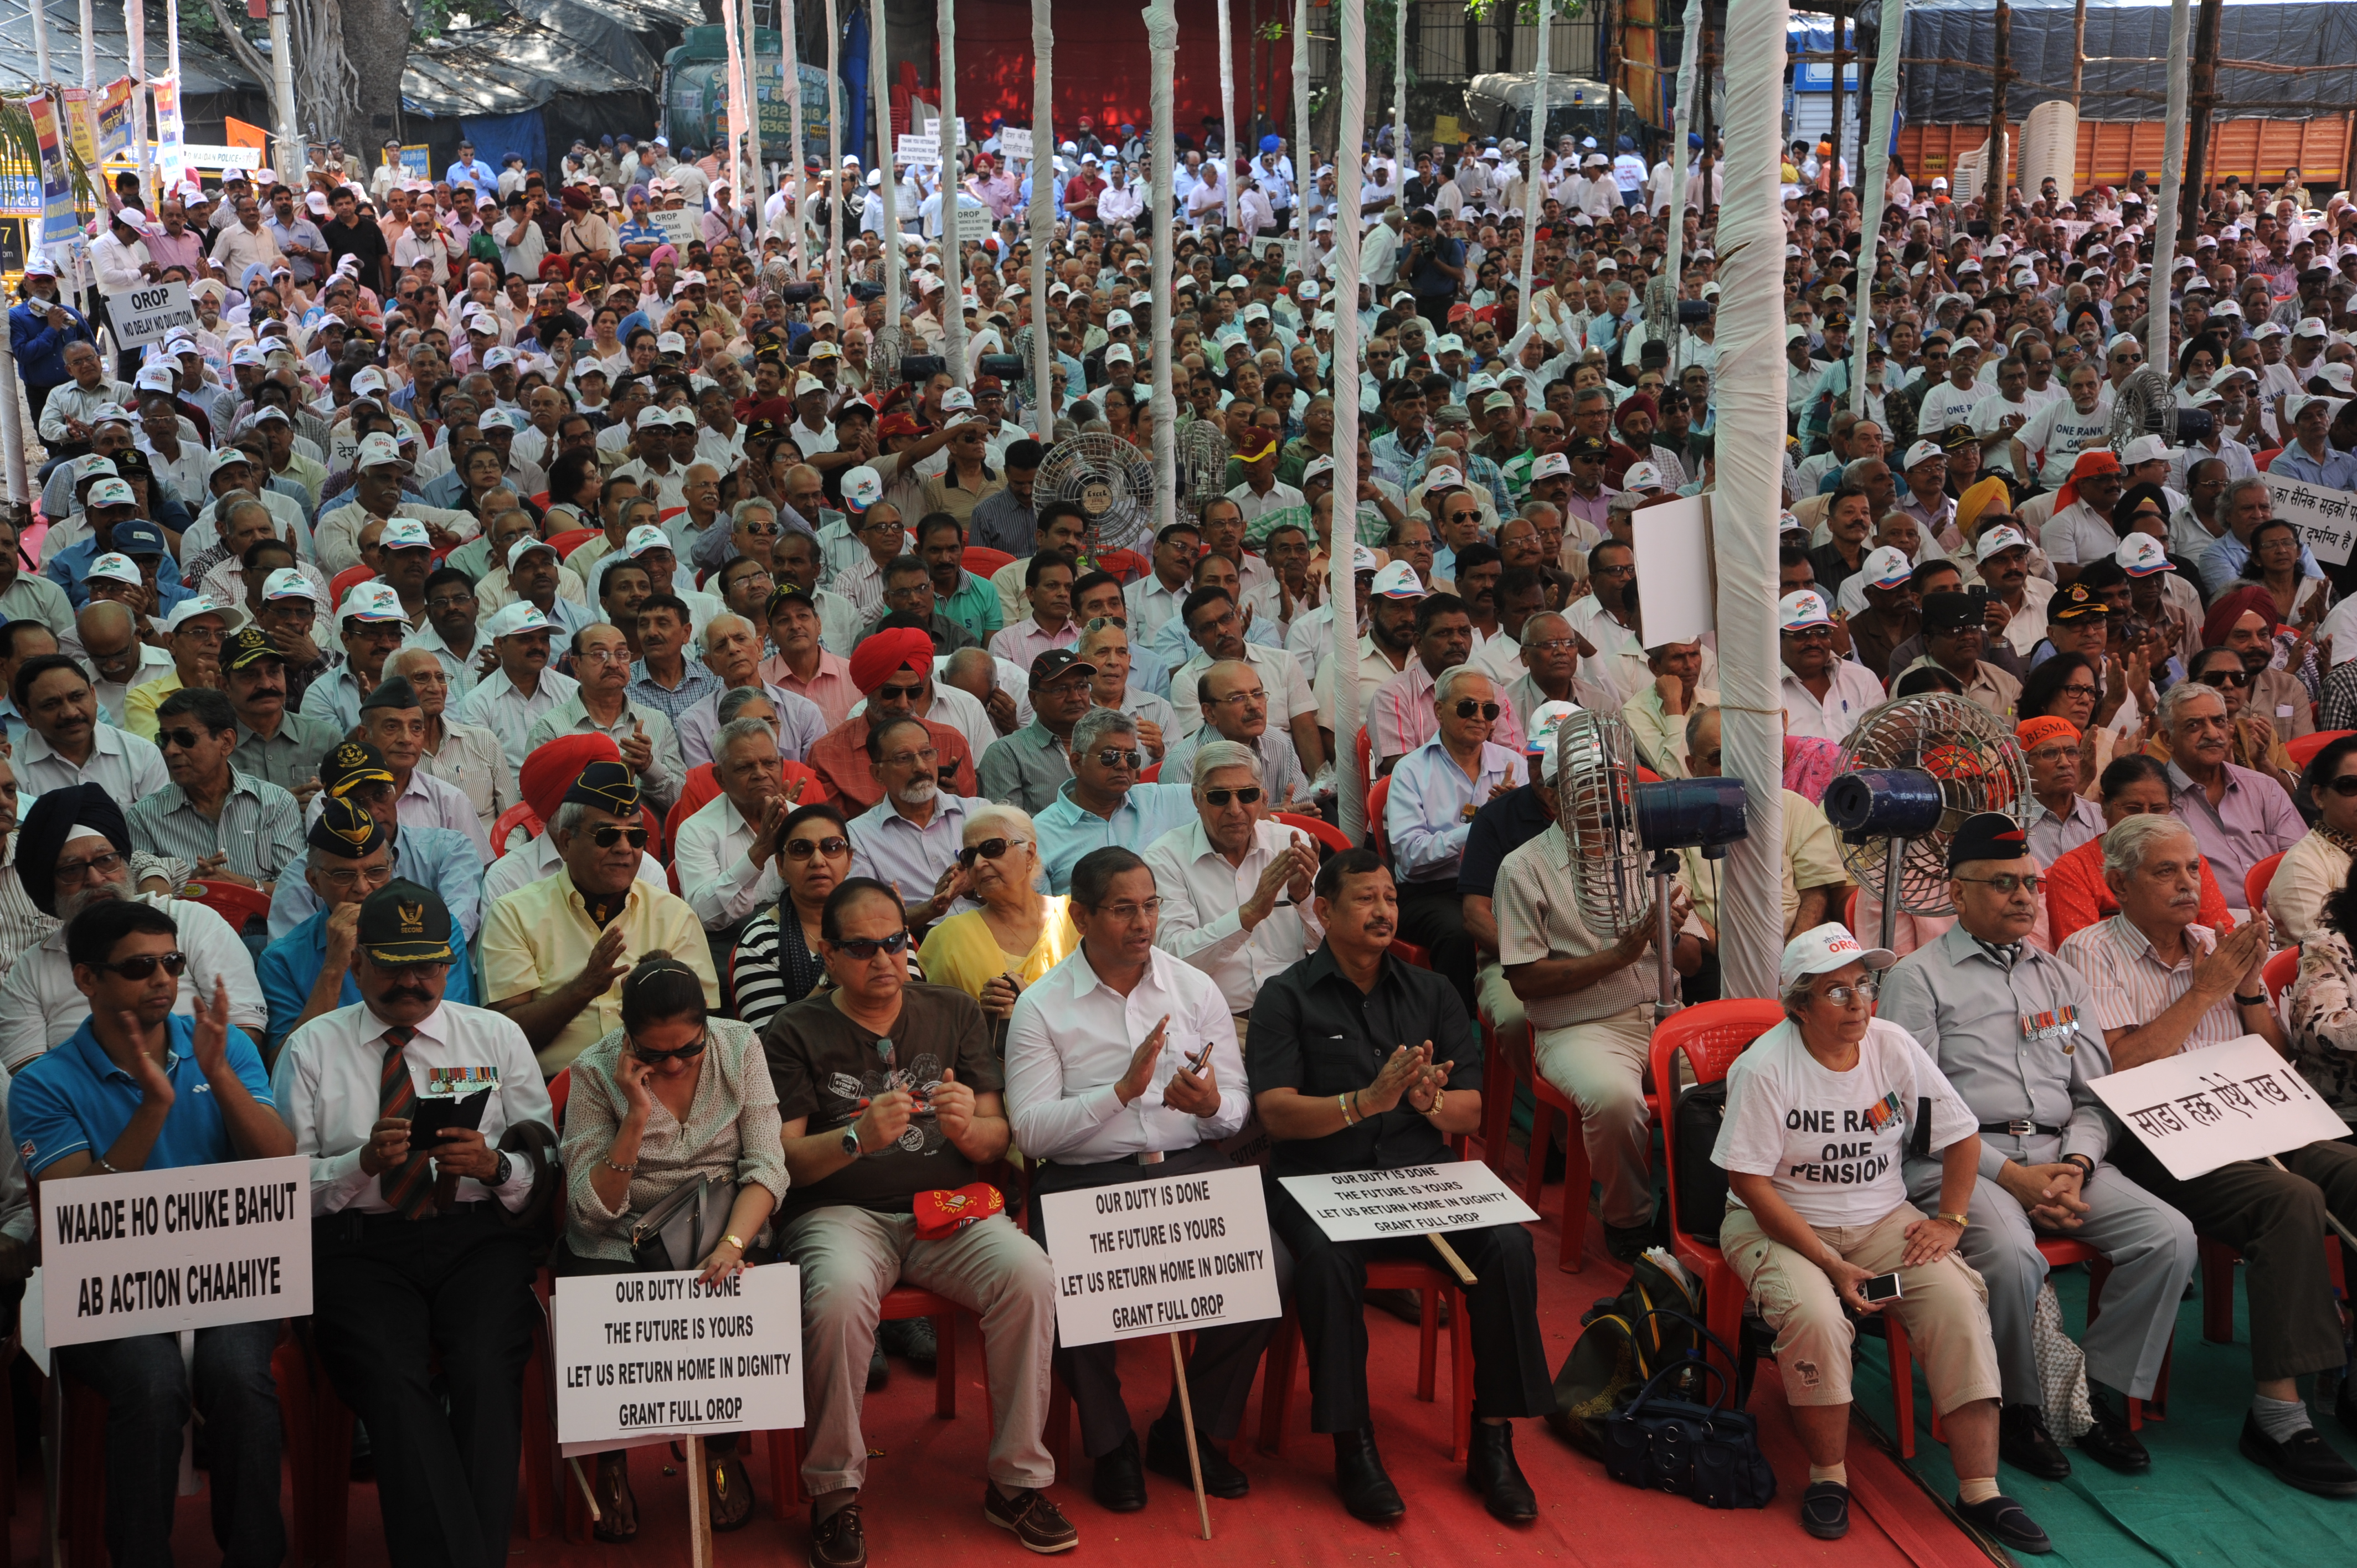 An orderly conduct of an OROP Rally! Even agitation has to be done in 'disciplined manner!